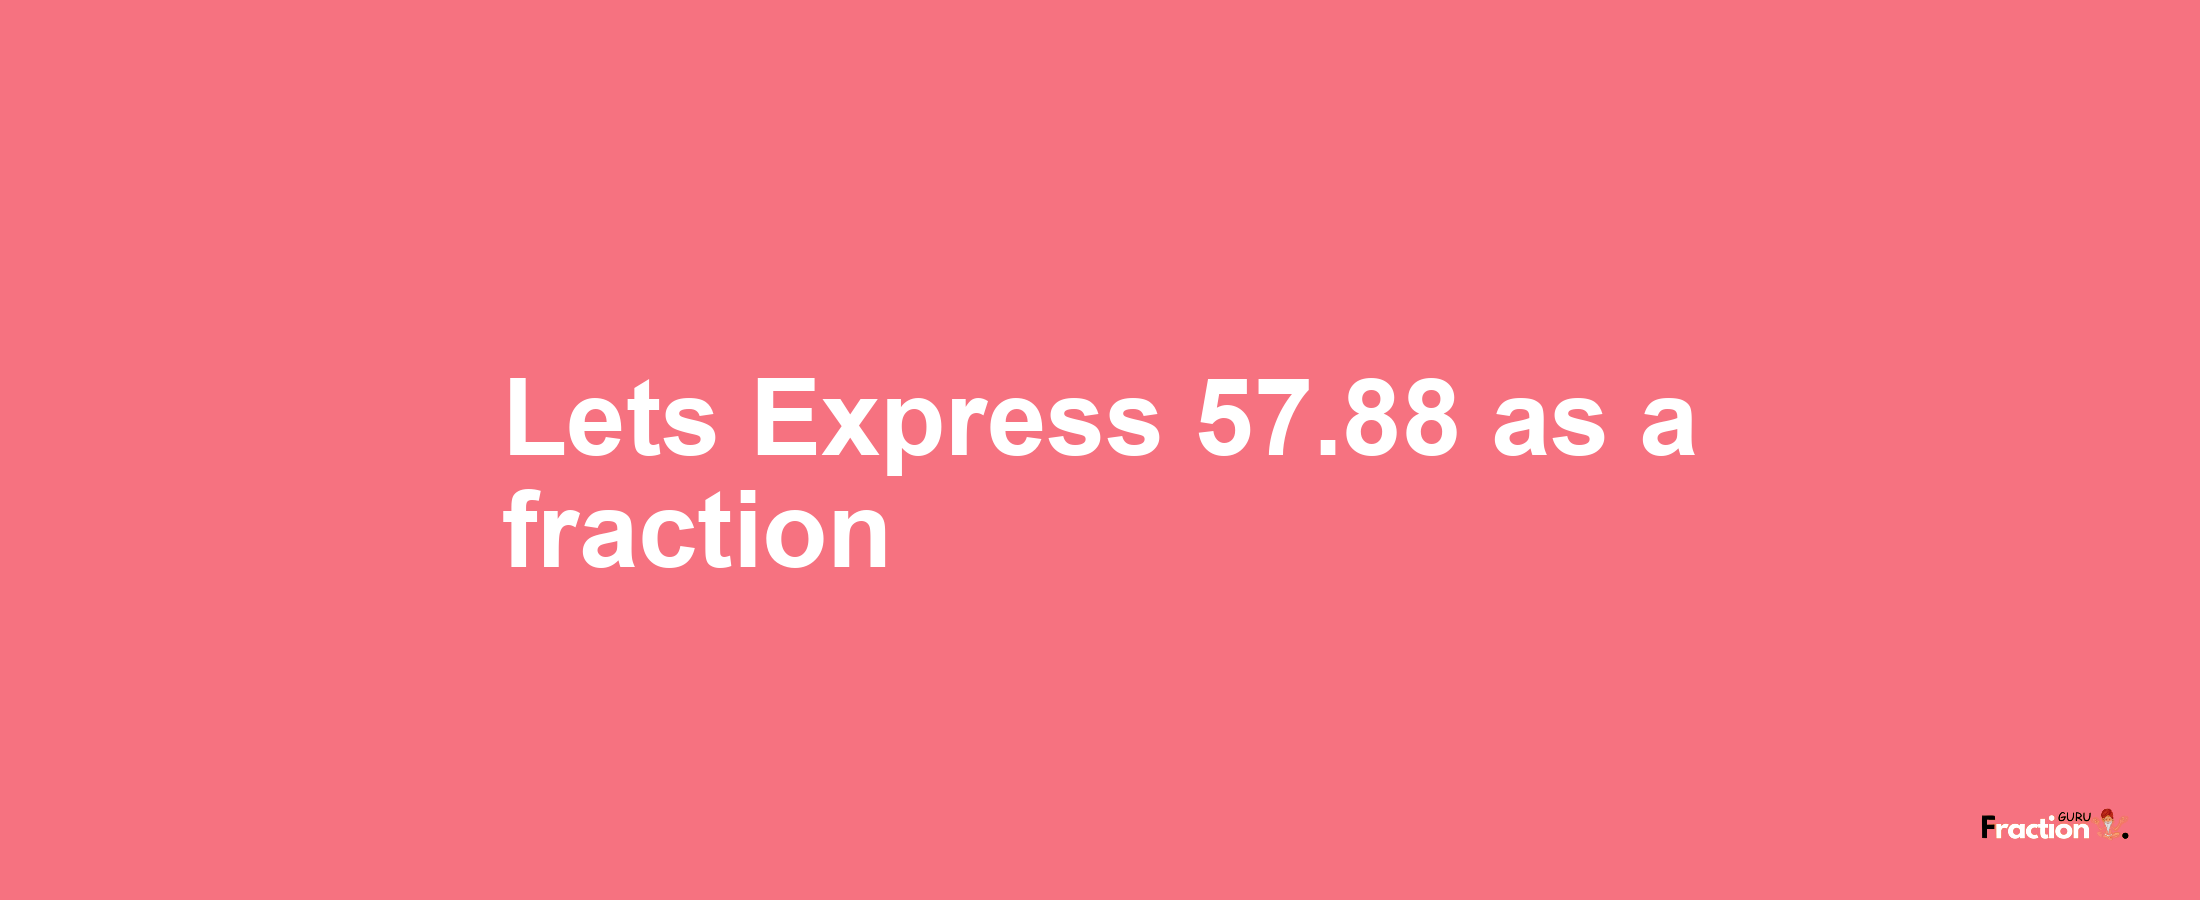 Lets Express 57.88 as afraction